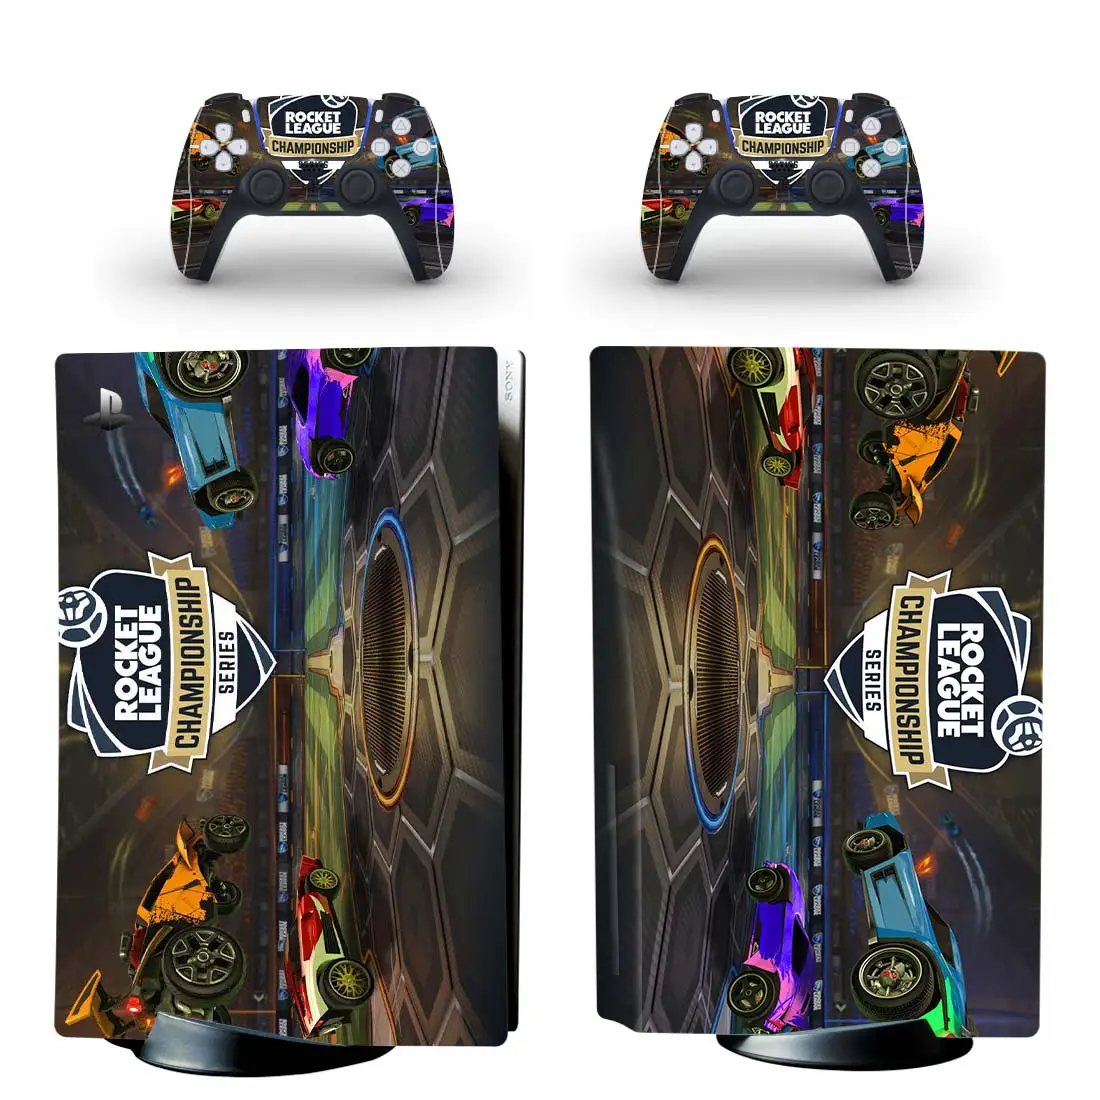 Rocket League Ps5 Standard Disc Edition Skin Sticker Decal Cover For  Playstation 5 Console & Controller Ps5 Skin Sticker Vinyl - Stickers -  AliExpress